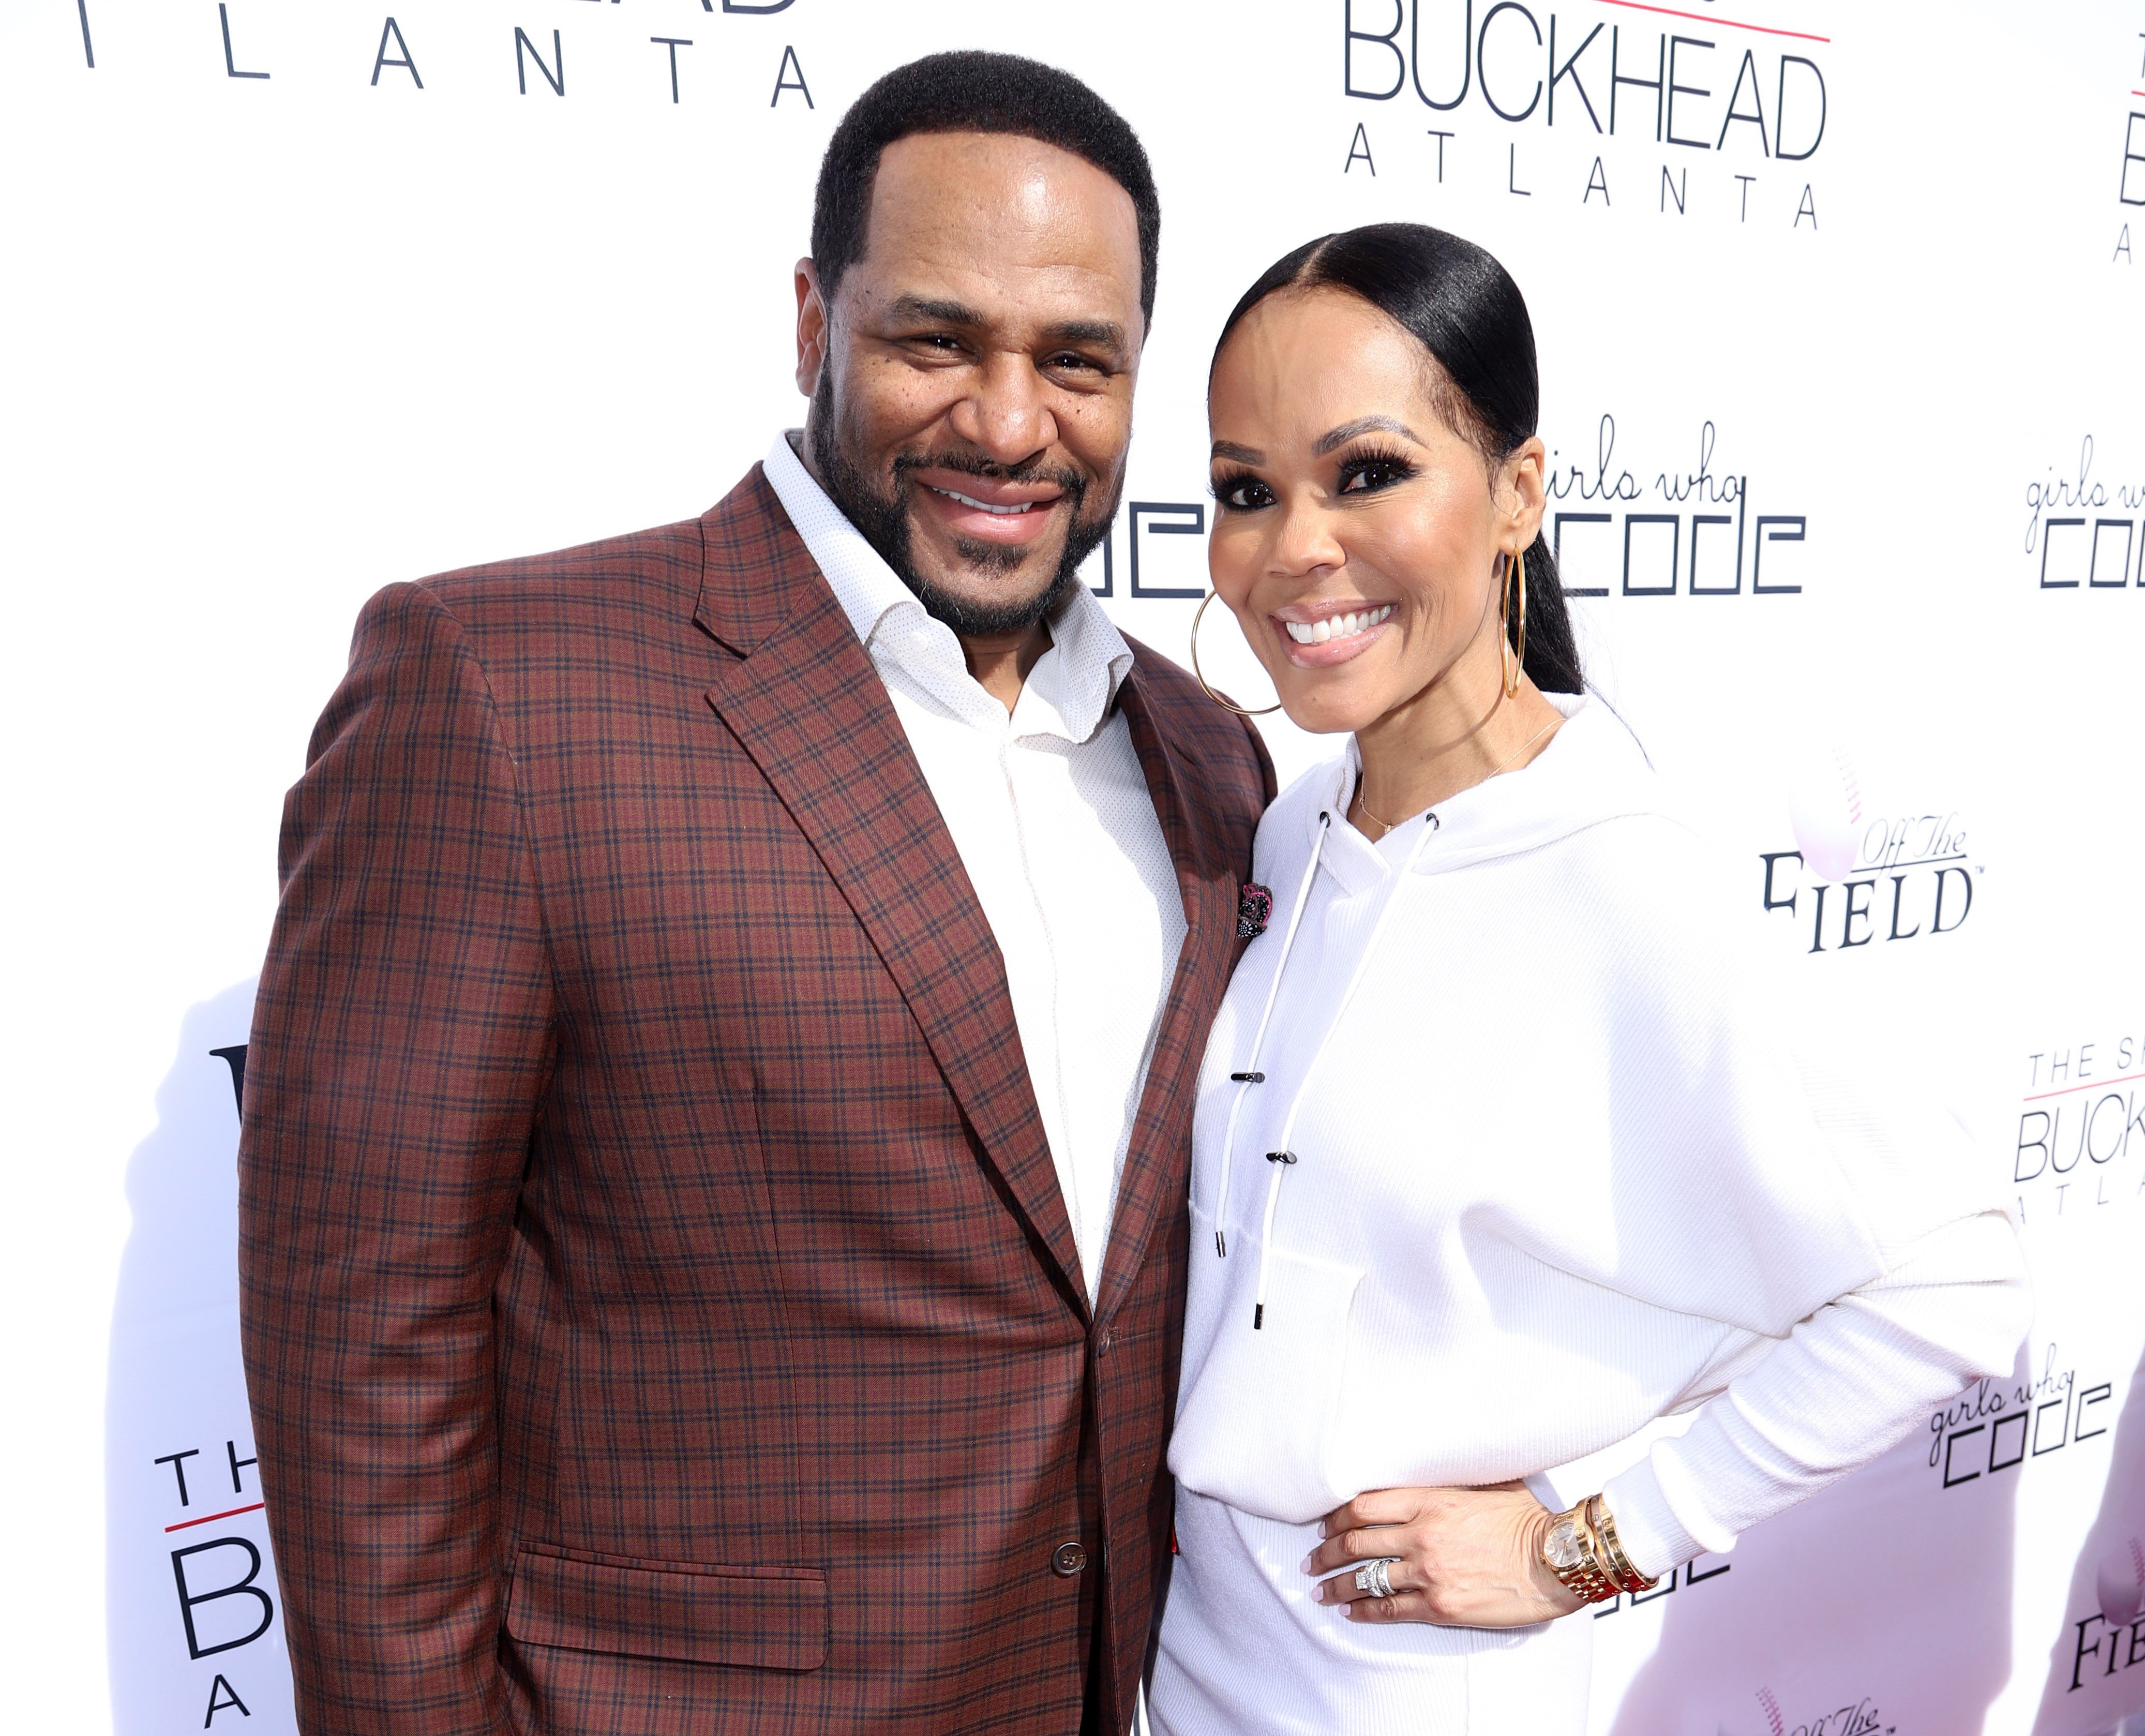 Jerome Bettis and wife Trameka at the Off The Field Players' Wives Fashion Show in 2019, in Atlanta, Georgia. | Source: Getty Images